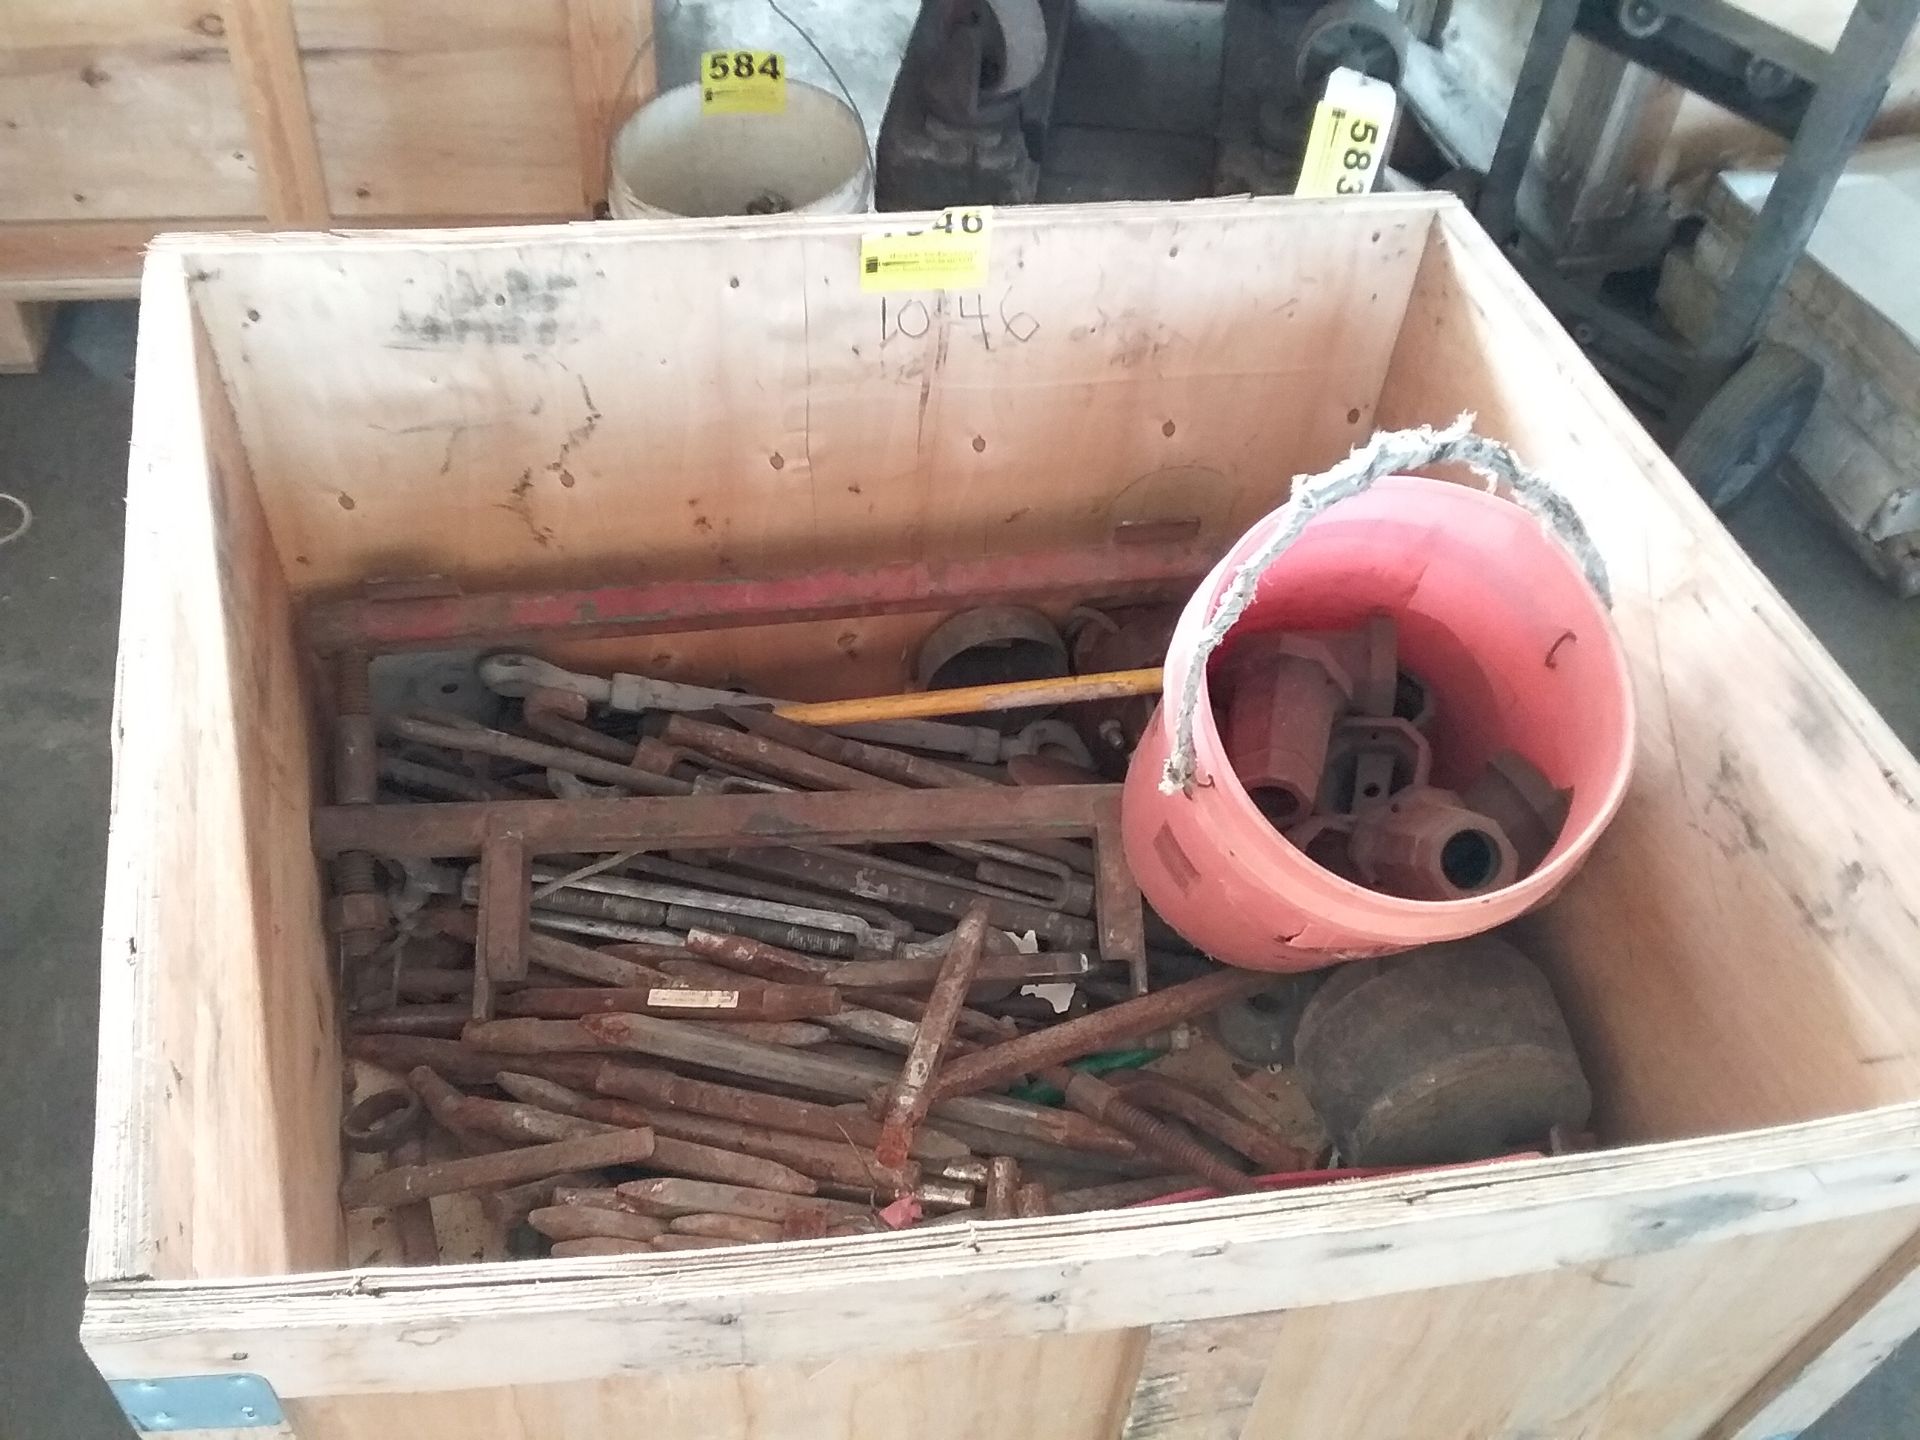 LOT: AIR COMPERSSOR FITTINGS IN BUCKET